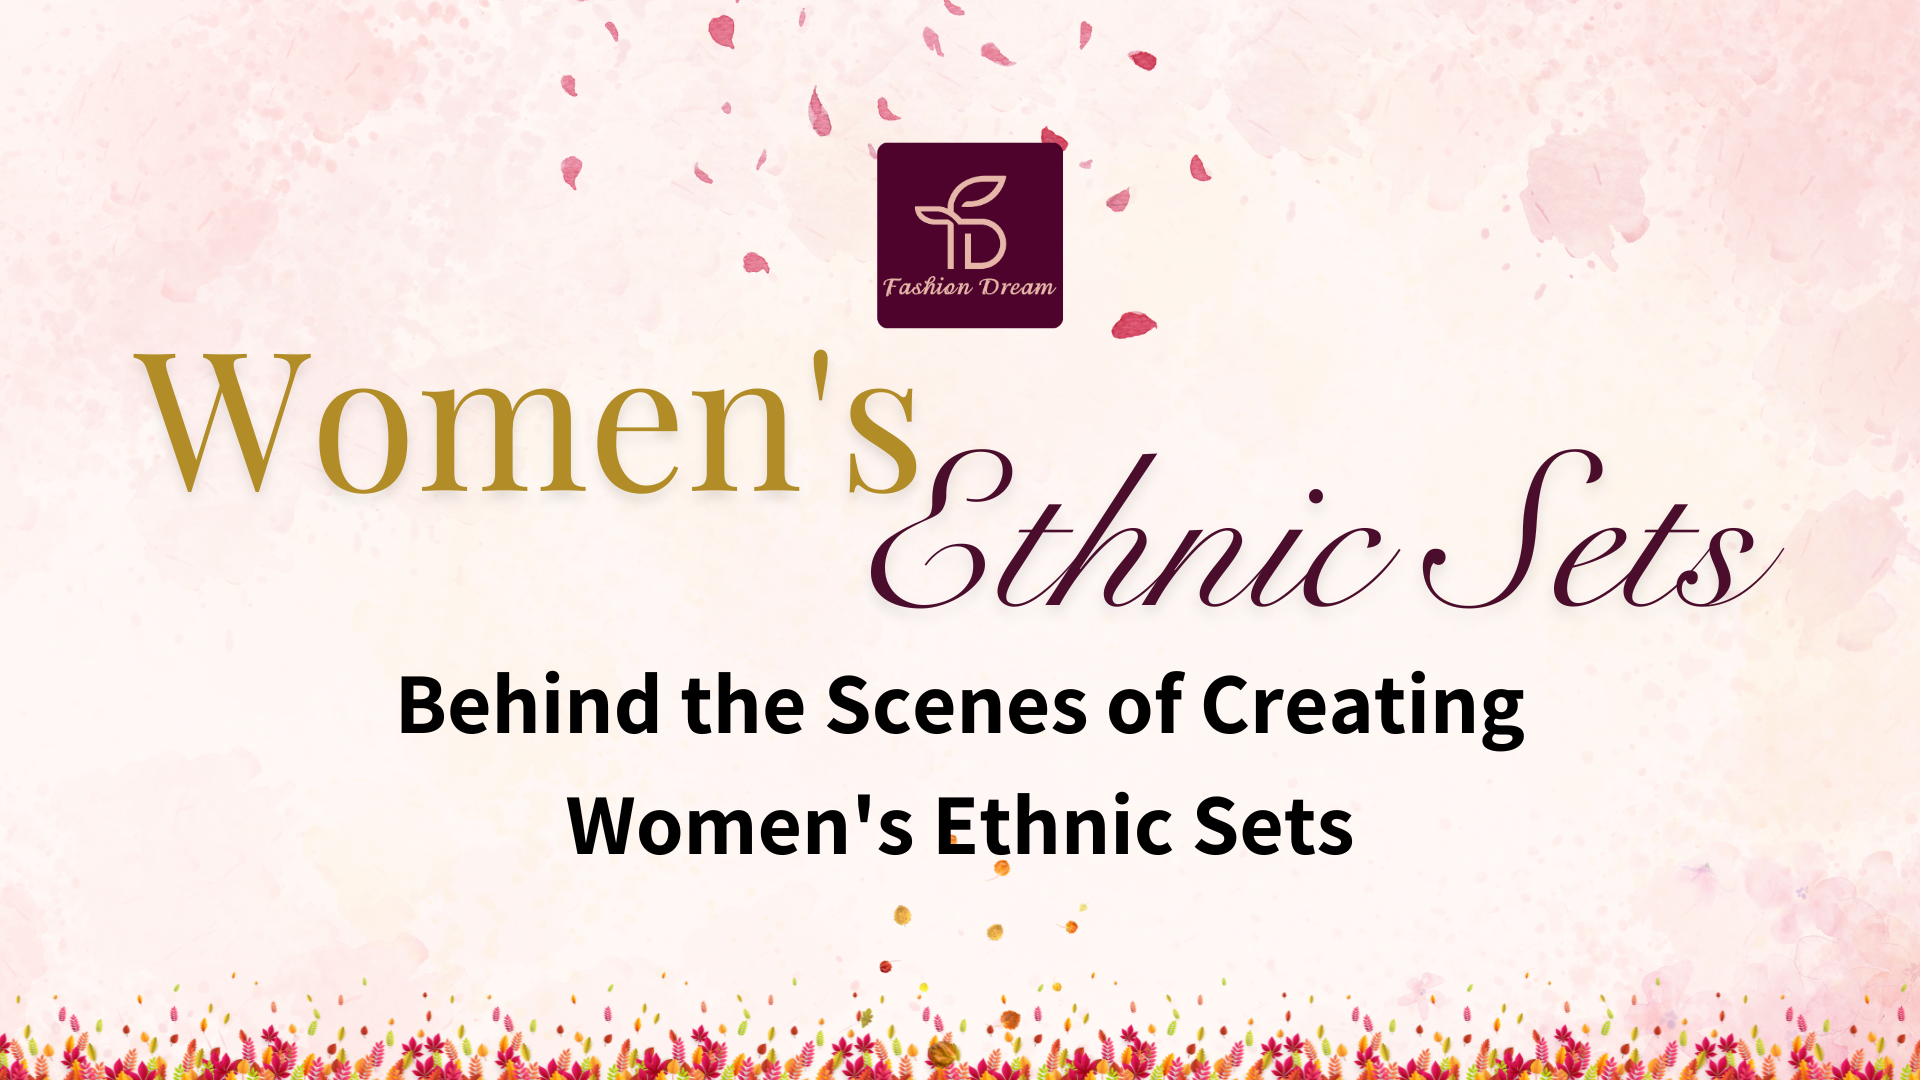 Behind the Scenes of Creating Women's Ethnic Sets